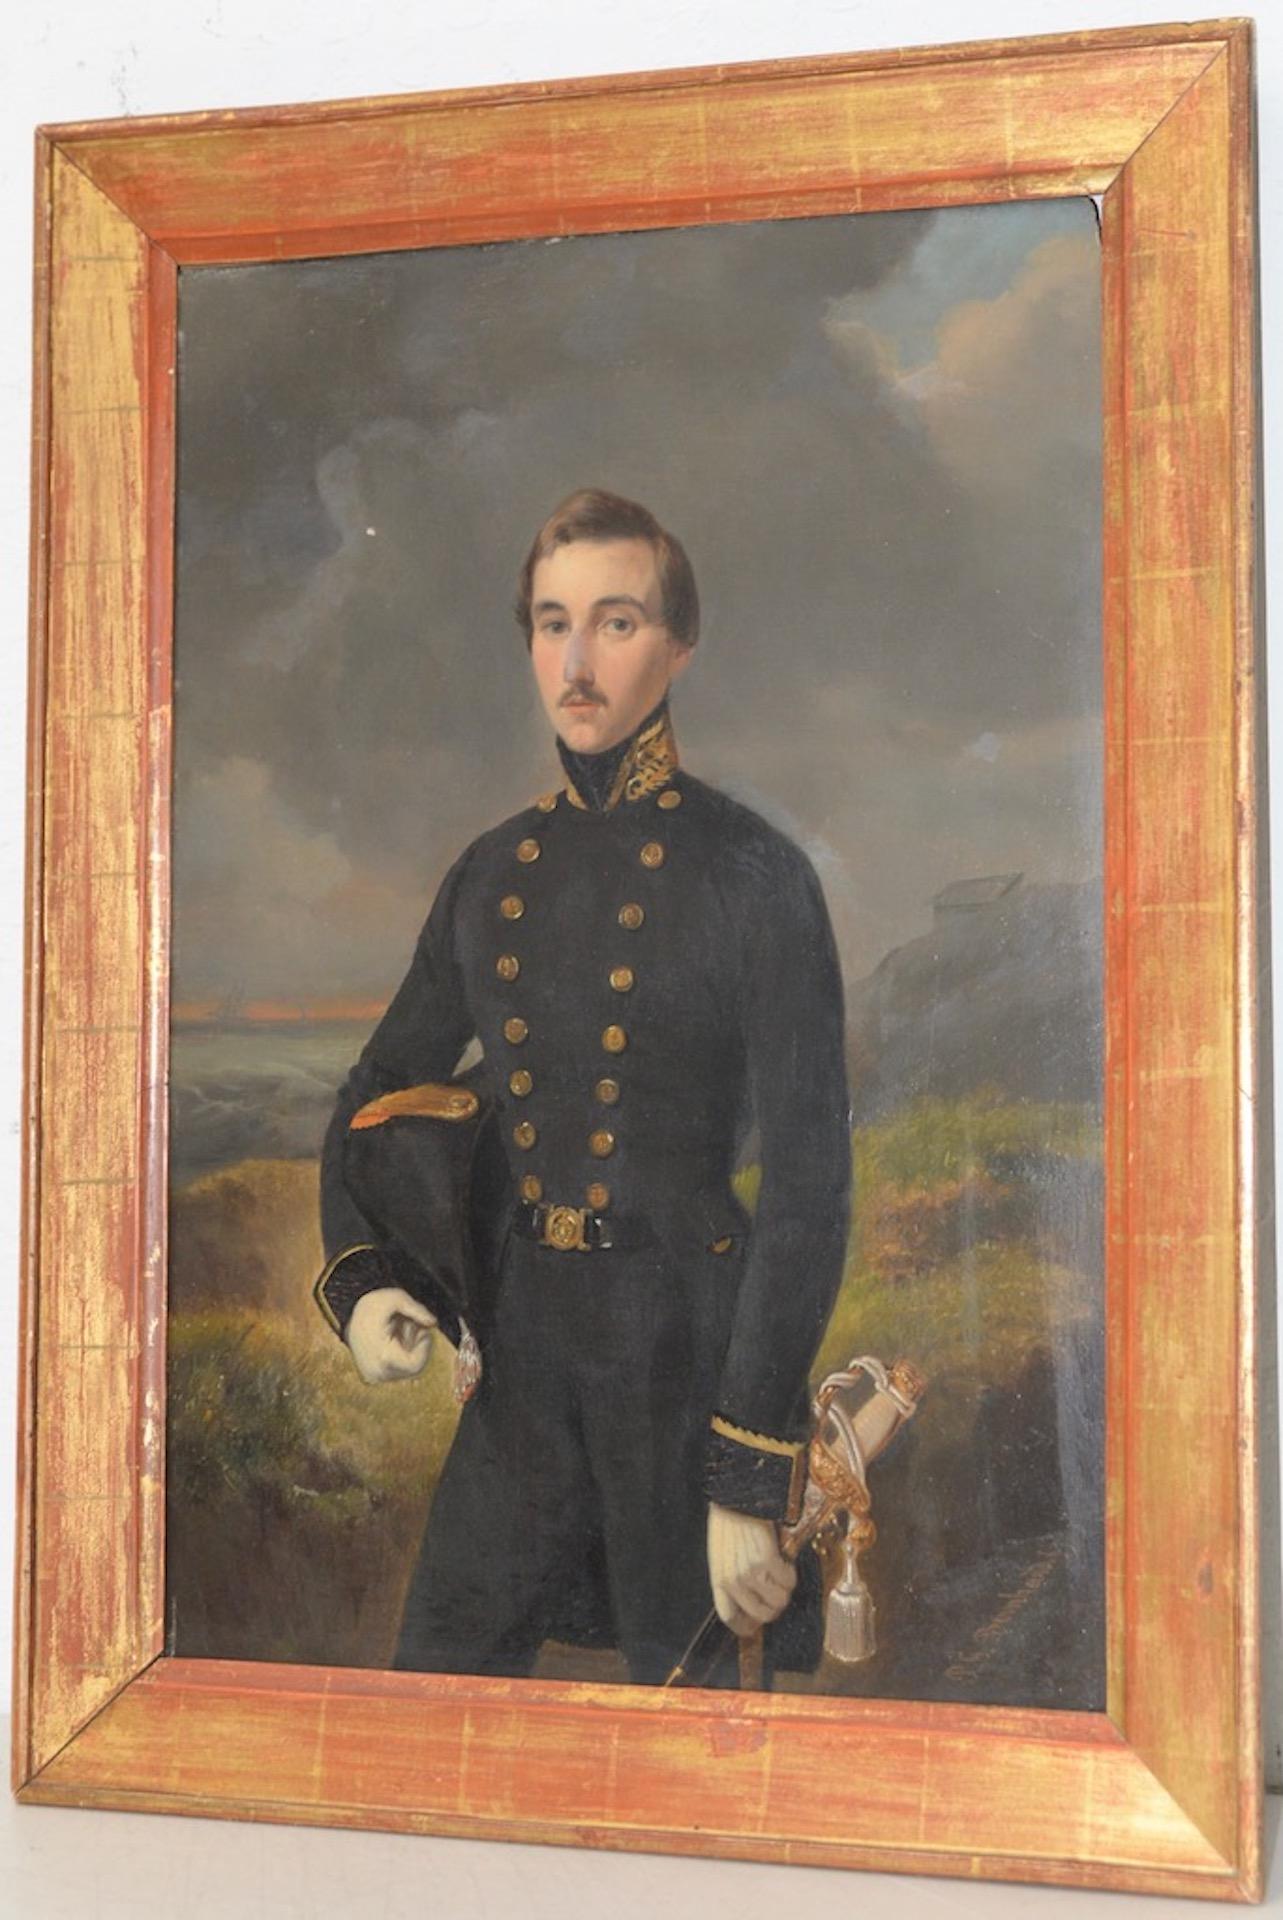 Pieter Gerardus Bernhard, Dutch, 1813-1880

Pieter Gerardus Bernhard Portrait of Military Officer in a Seaside Landscape, circa 1850s

The officer stands tall and proud against a backdrop of stormy gray clouds and the ocean as a